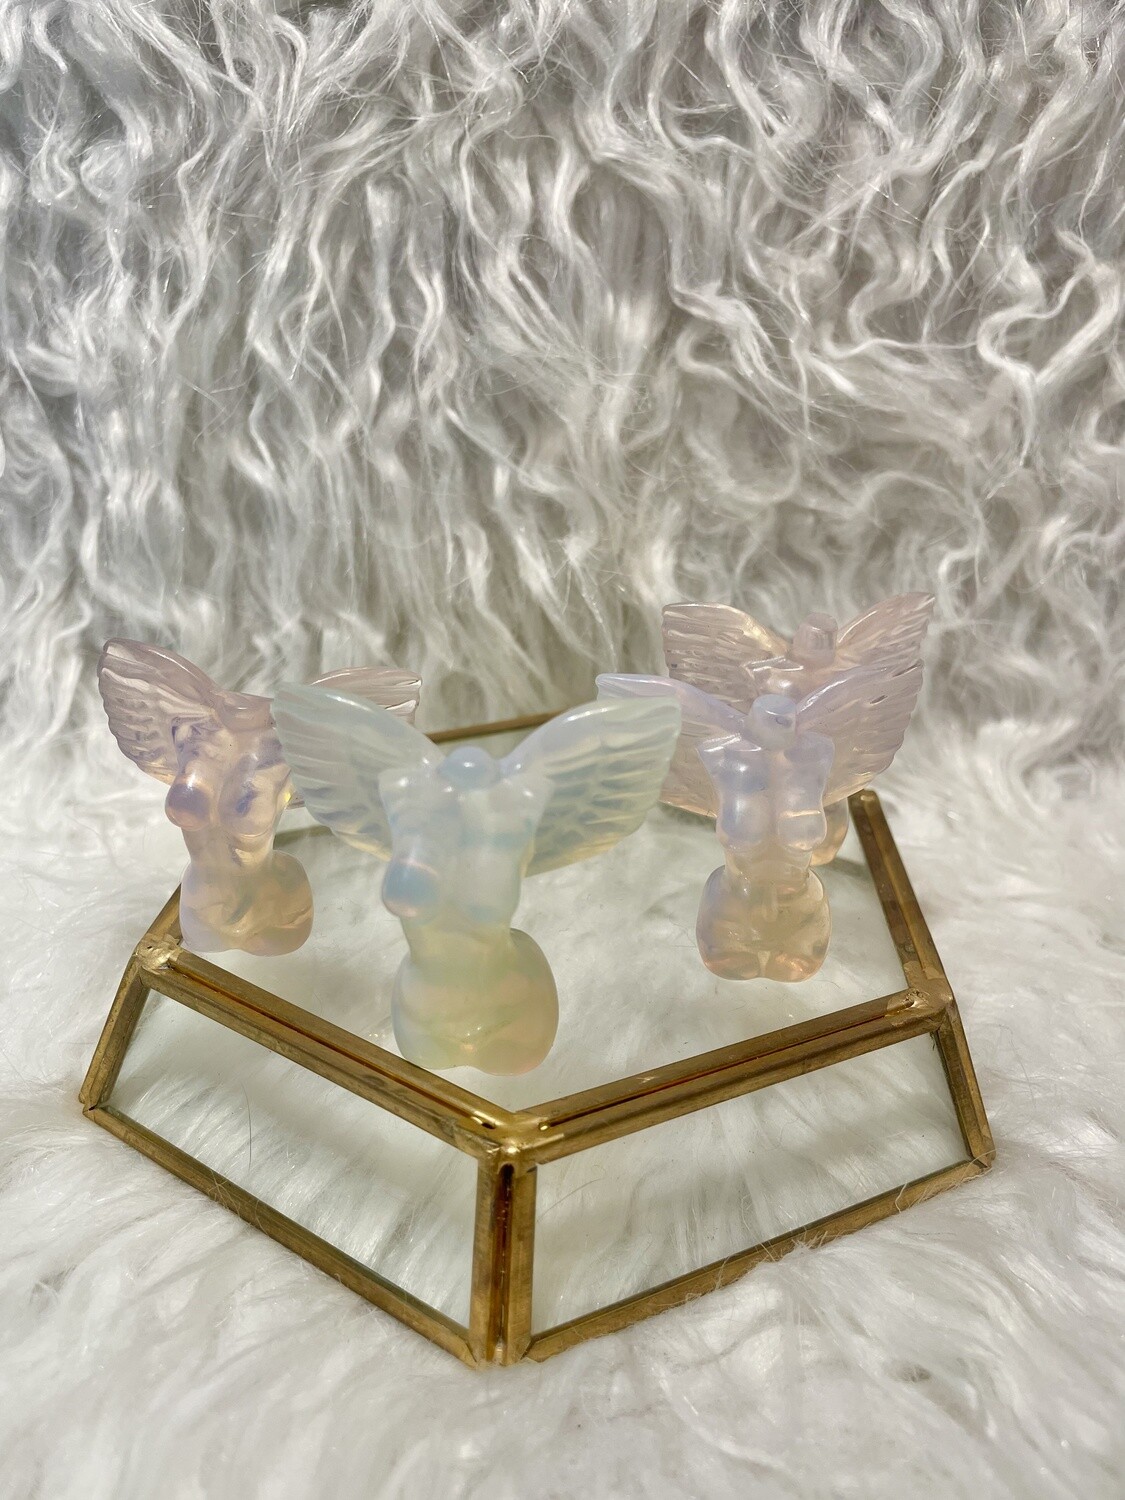 Bootylicious Opalite Female Bodies with Angel Wings